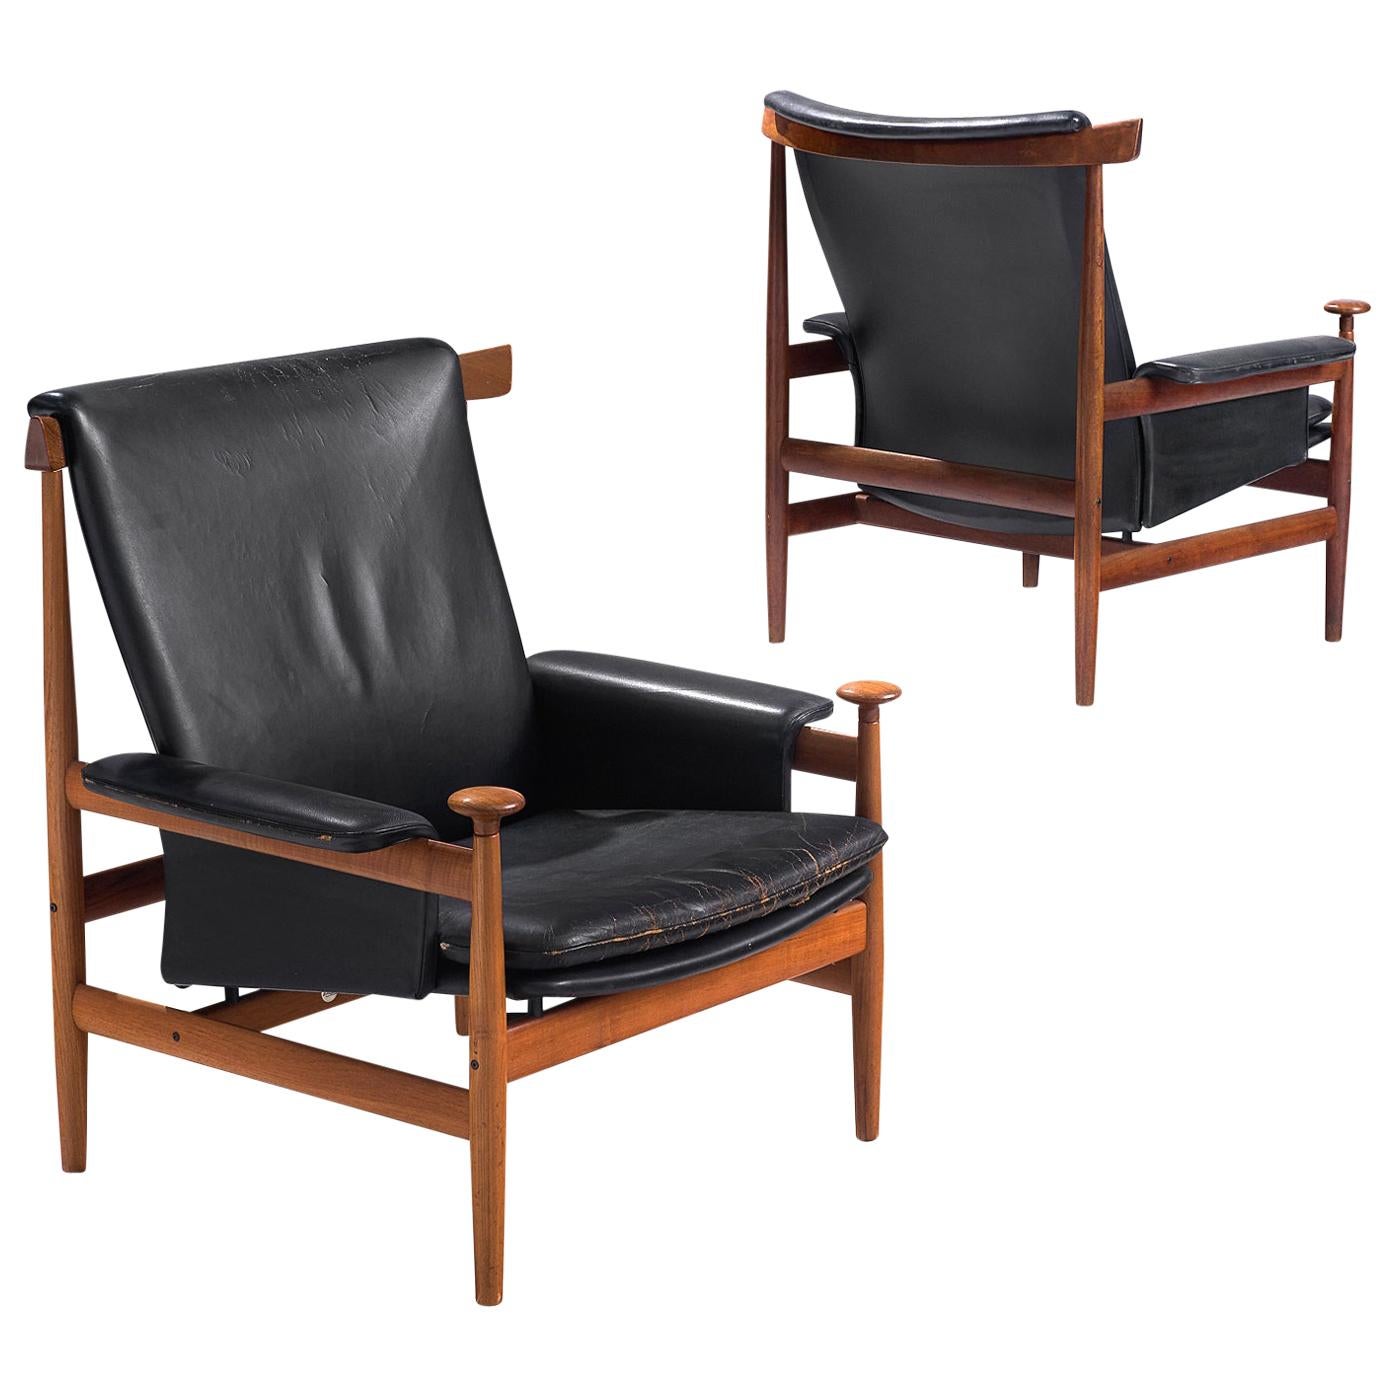 Two "Bwana" Chairs with Black Leather by Finn Juhl